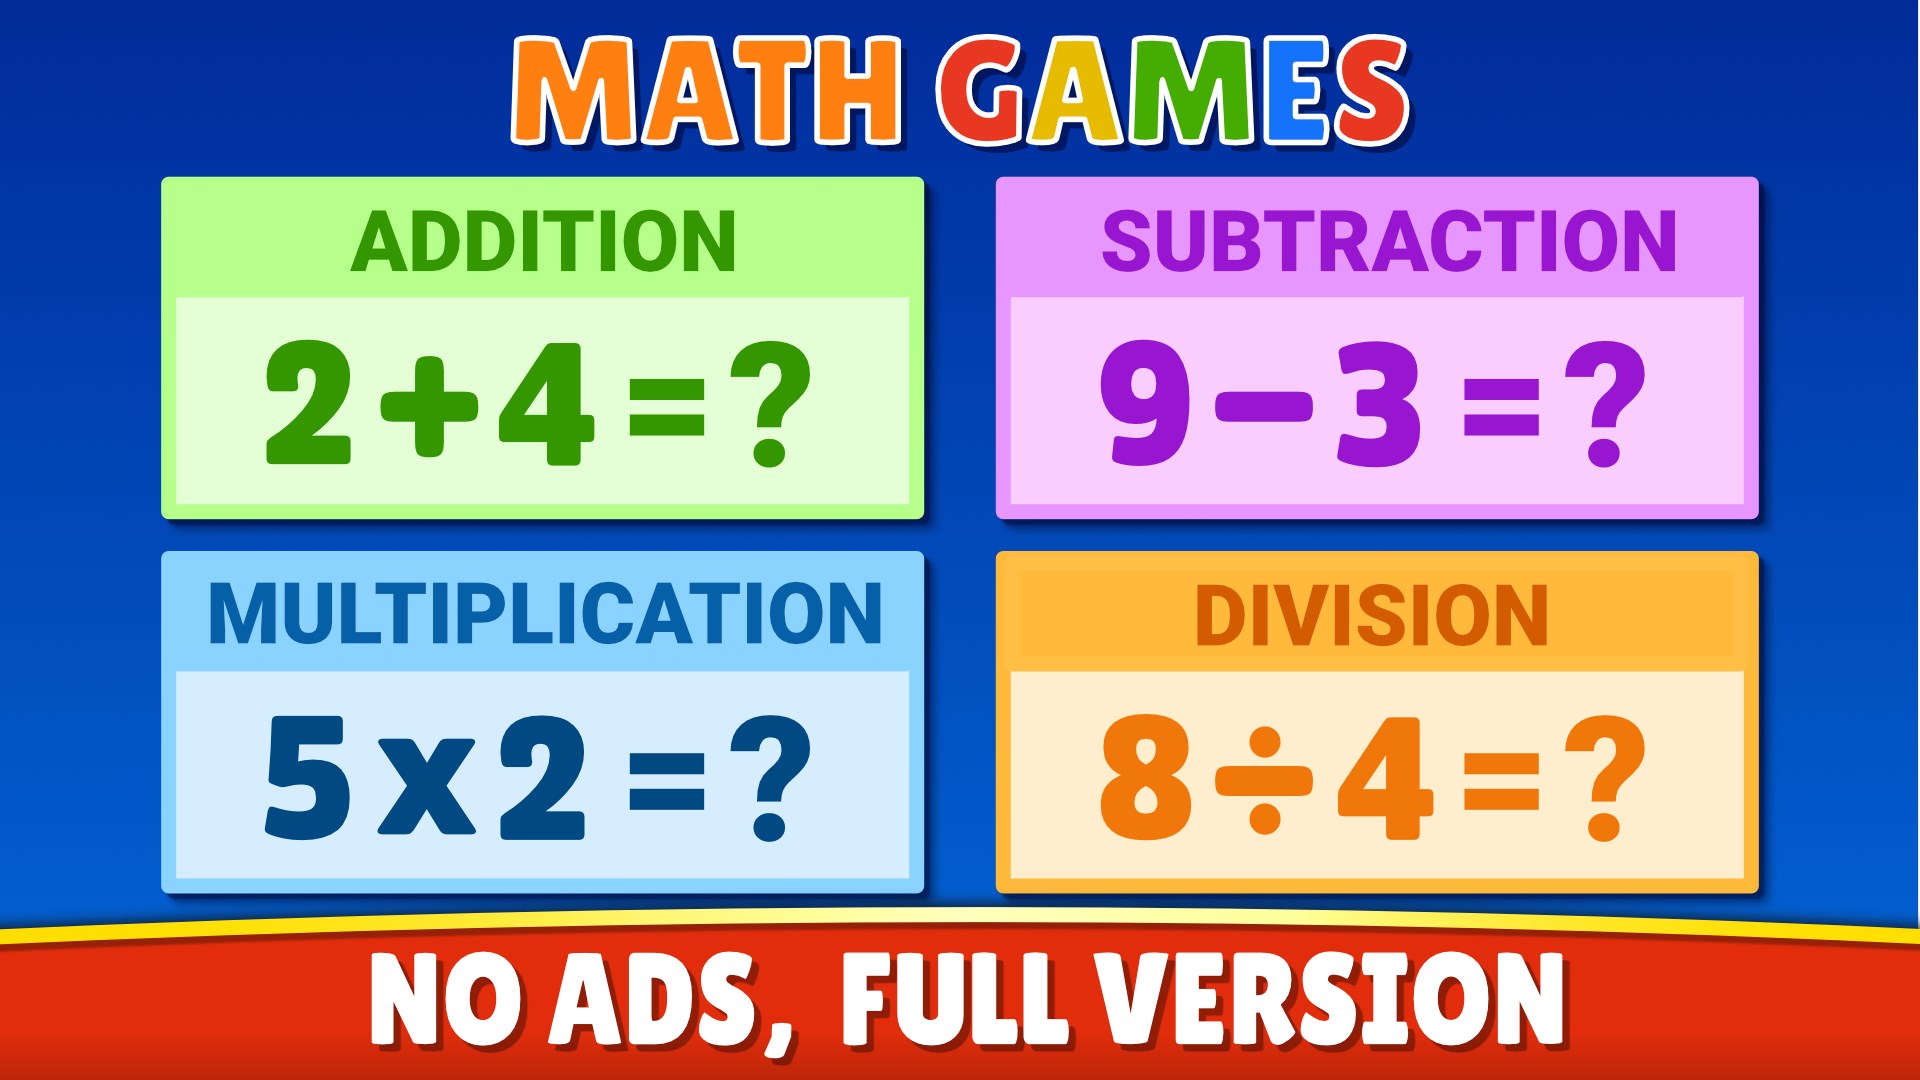 The multiplication game for mathematics understanding